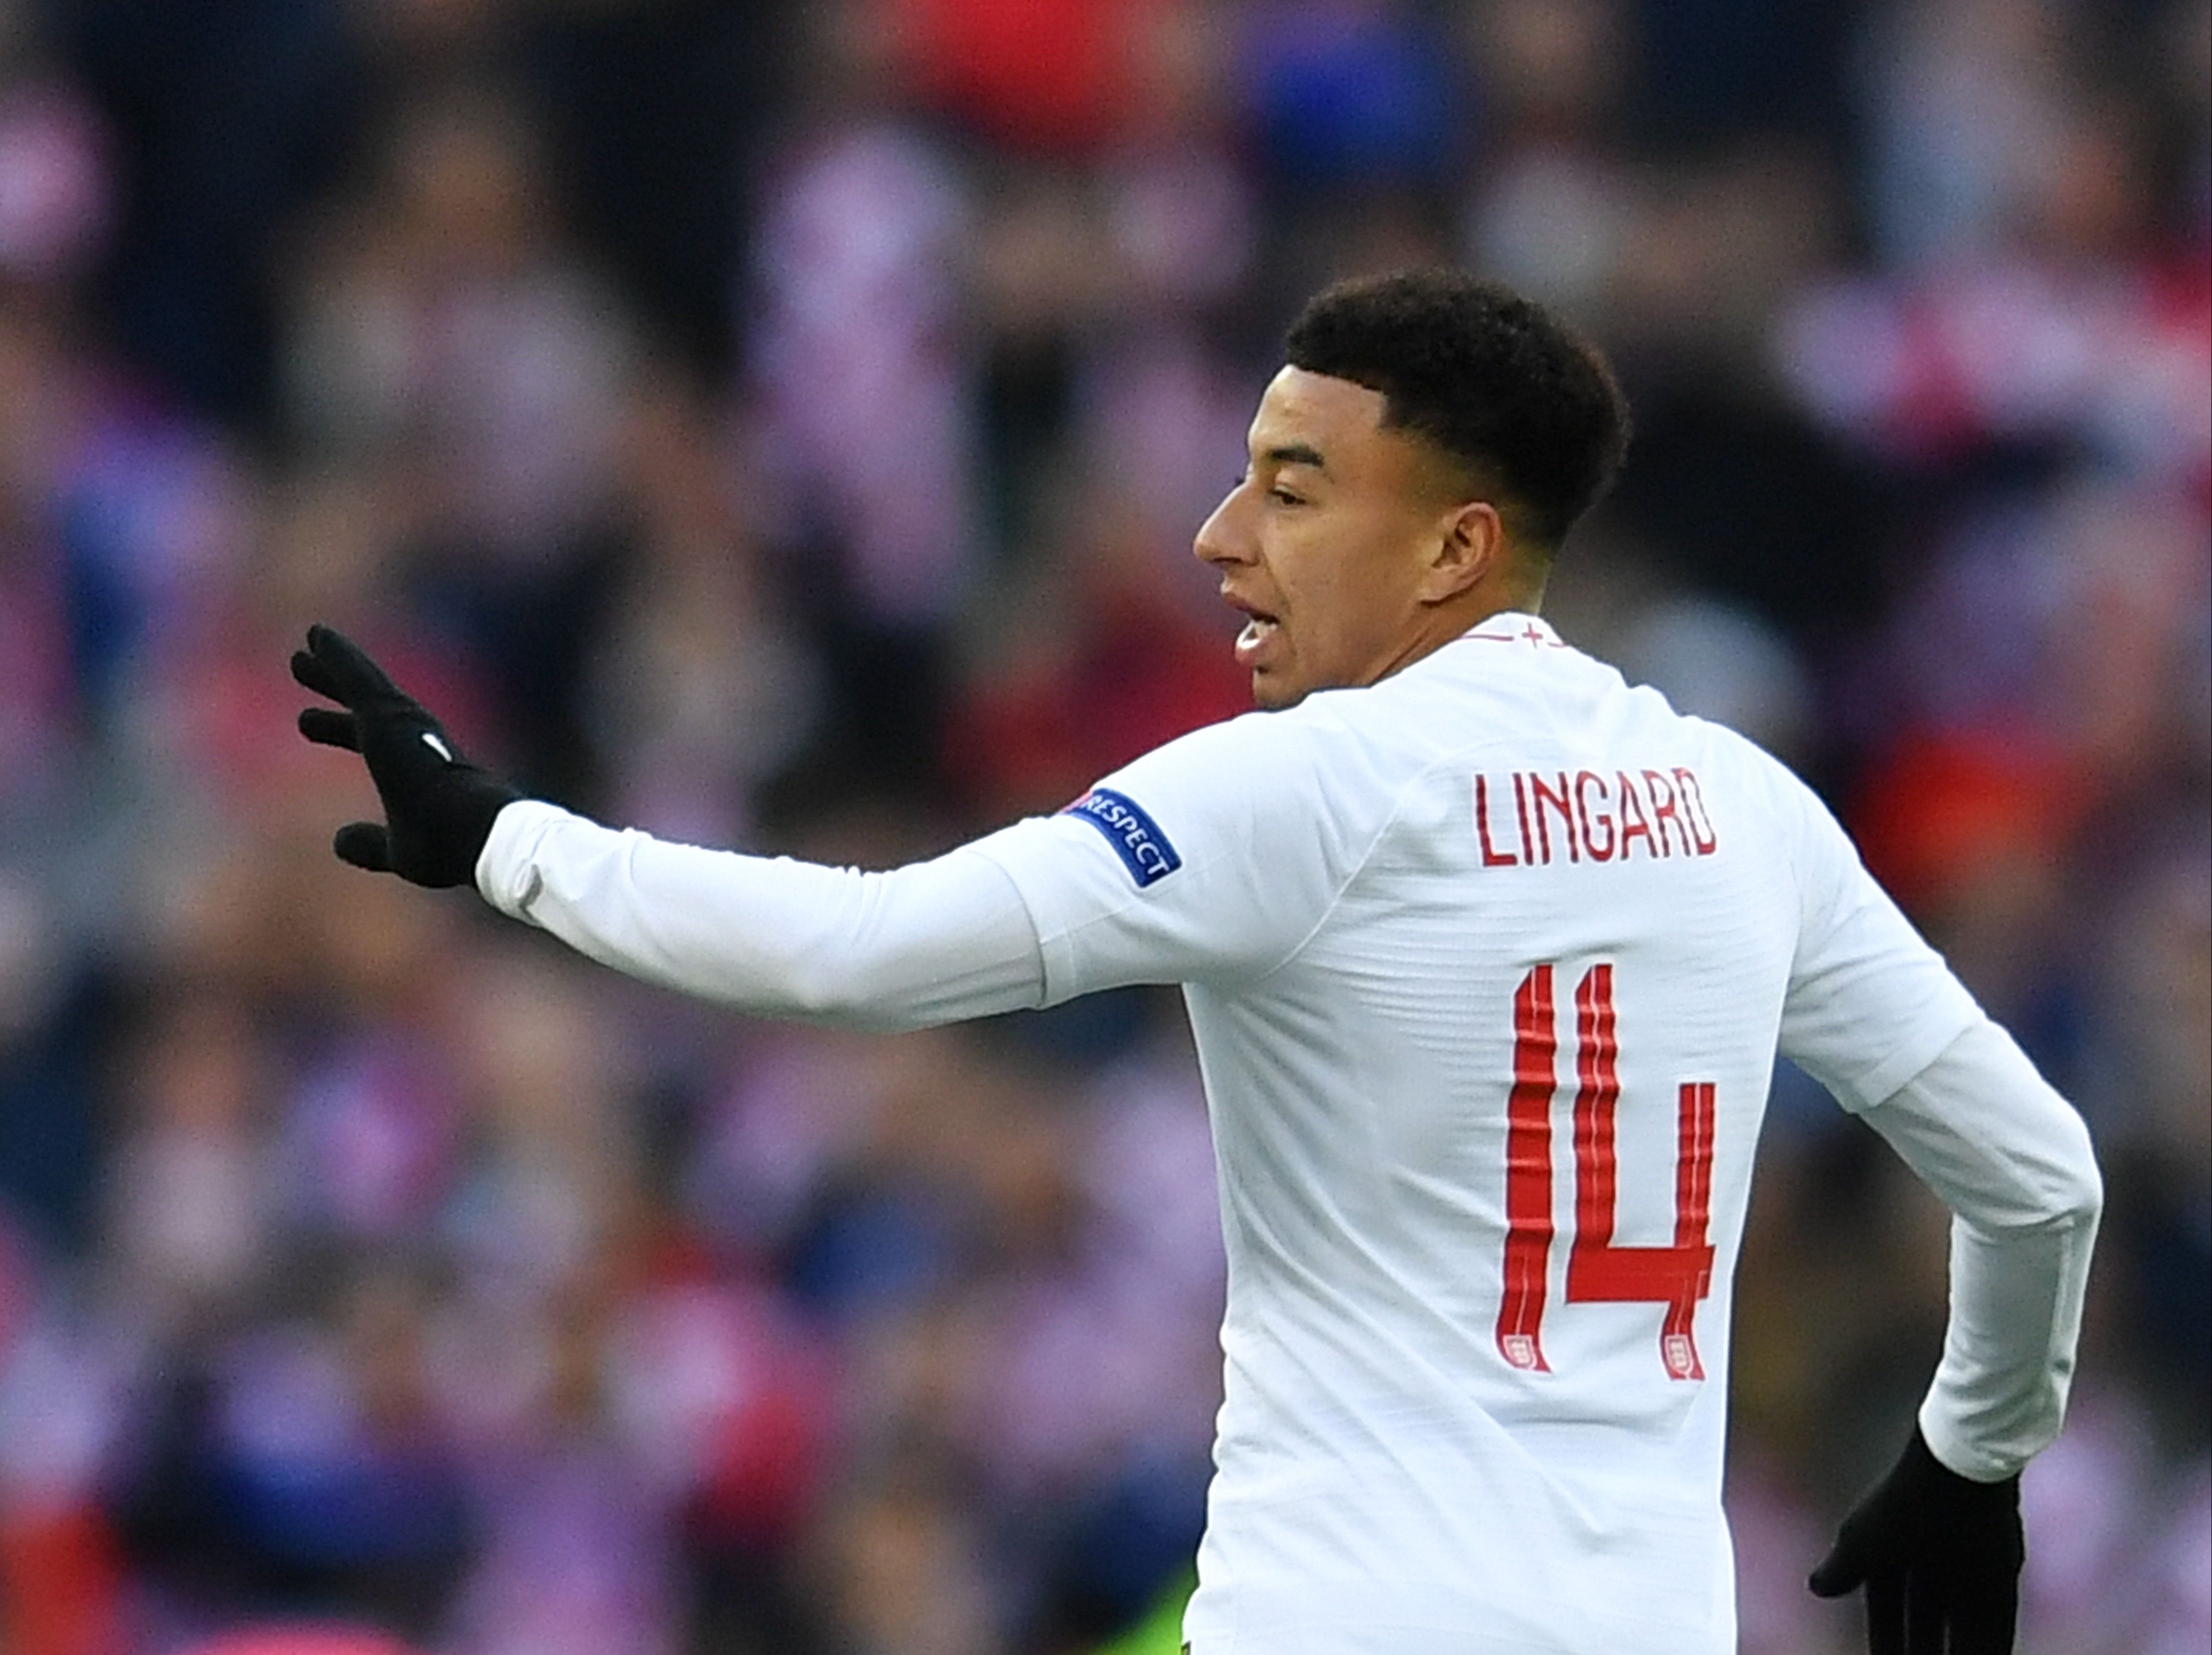 Jesse Lingard last featured for England in 2019